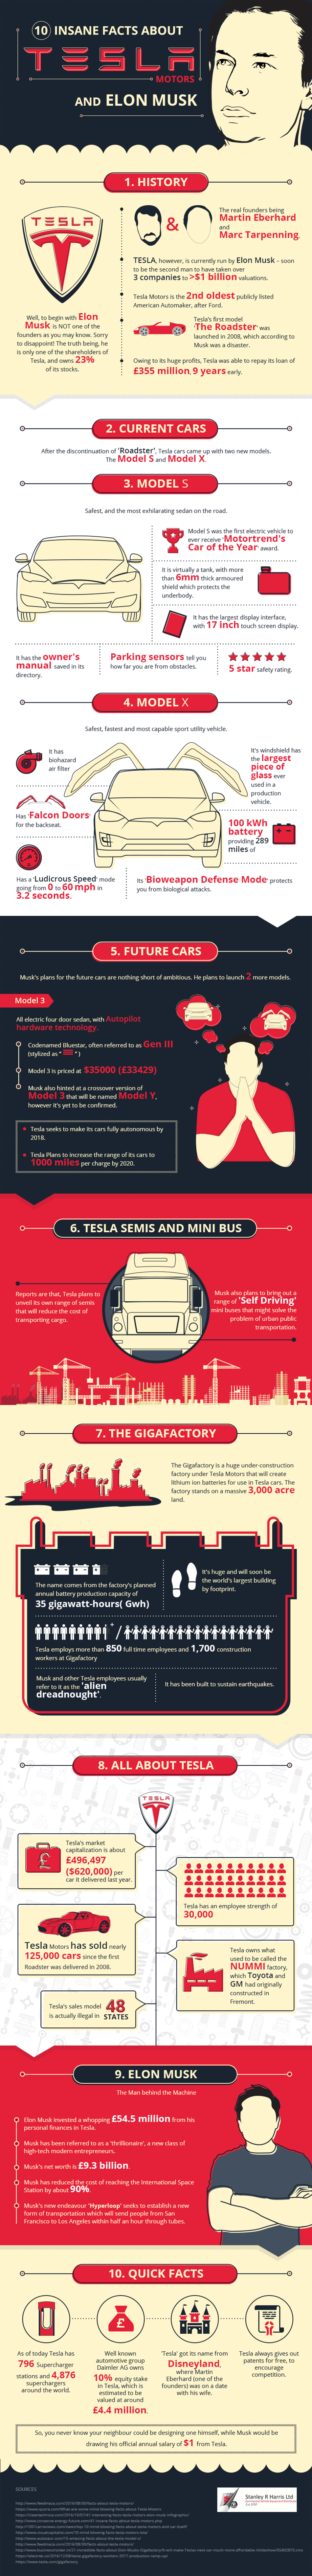 10 Facts You Didn't Know About Tesla Motors & Elon Musk